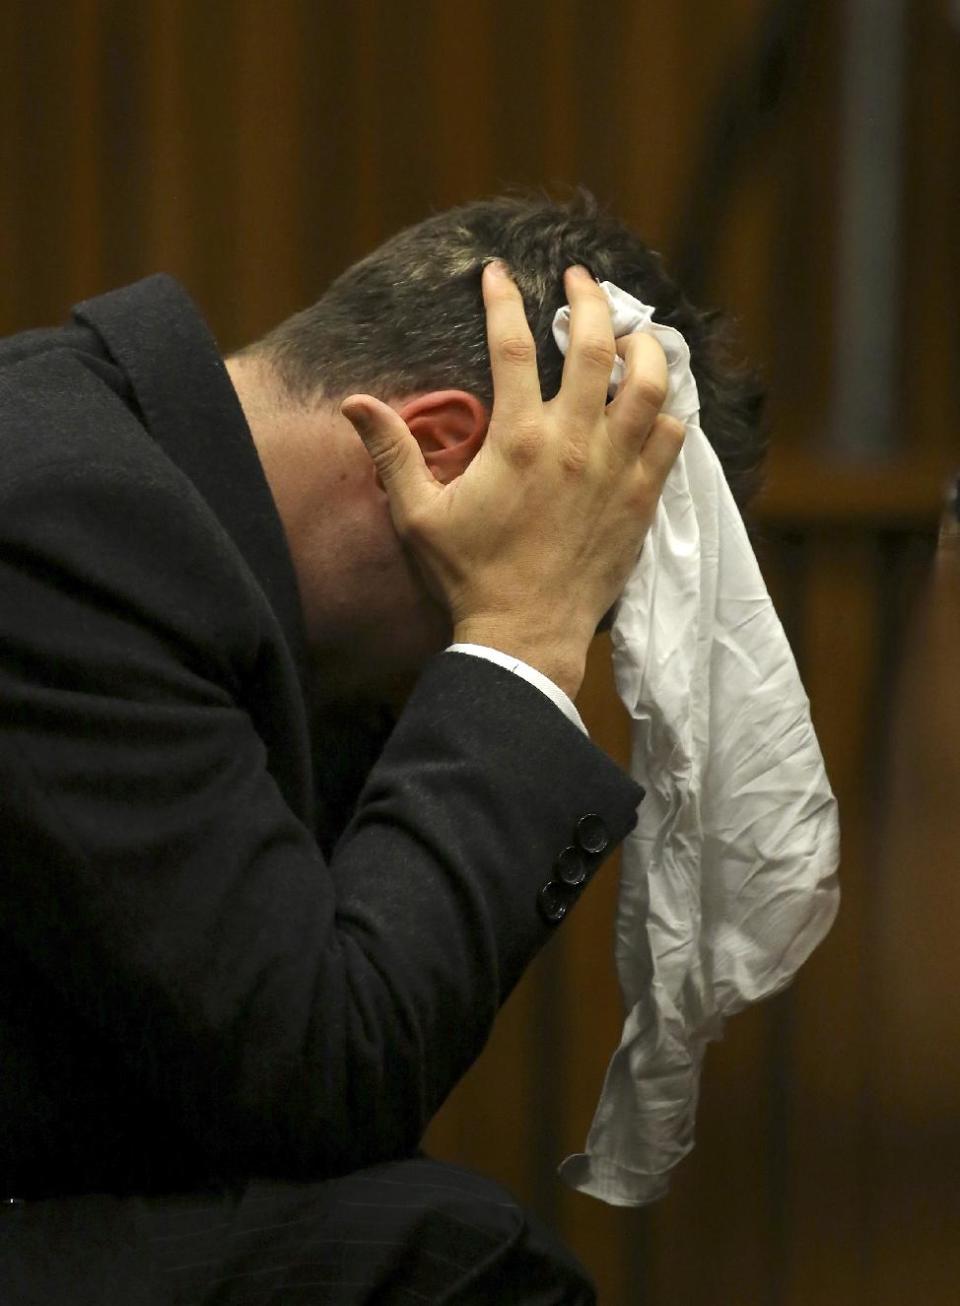 Oscar Pistorius covers his head with a handkerchief after he had reached for a bucket at his feet while listening to cross questioning about the events surrounding the shooting death of his girlfriend Reeva Steenkamp, in his second week in court during his trial in Pretoria, South Africa, Monday, March 10, 2014. Pistorius is charged with the shooting death of his girlfriend Steenkamp, on Valentines Day in 2013. (AP Photo/Siphiwe Sibeko, Pool)